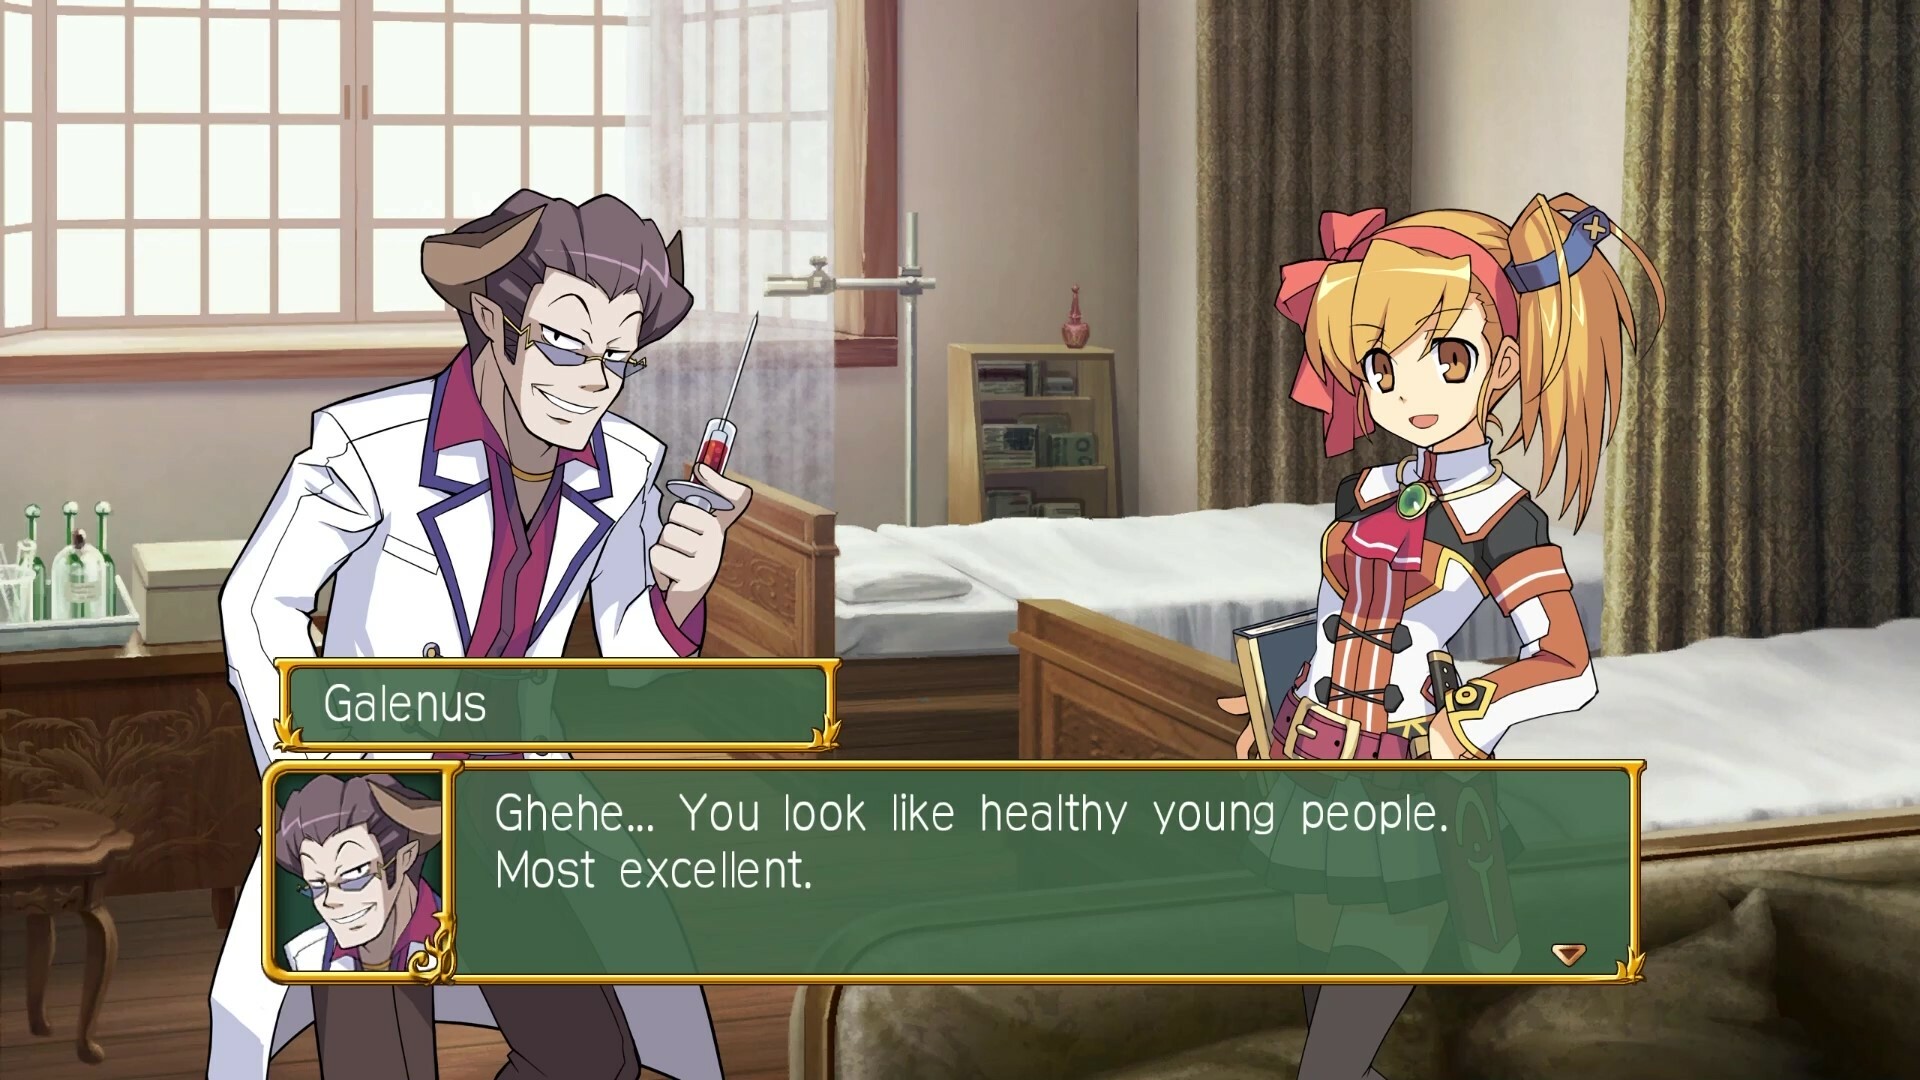 A screenshot from Class of Heroes 2G: Remaster Edition. To the left, a man with sunglasses (despite being in what appears to be a hospital) and a white lab coat is holding a needle containing red fluid. His name is Galenus, and he says: "Ghehe, you look like healthy young people. Most excellent." To the right is a girl with blonde pigtails and a red headband.